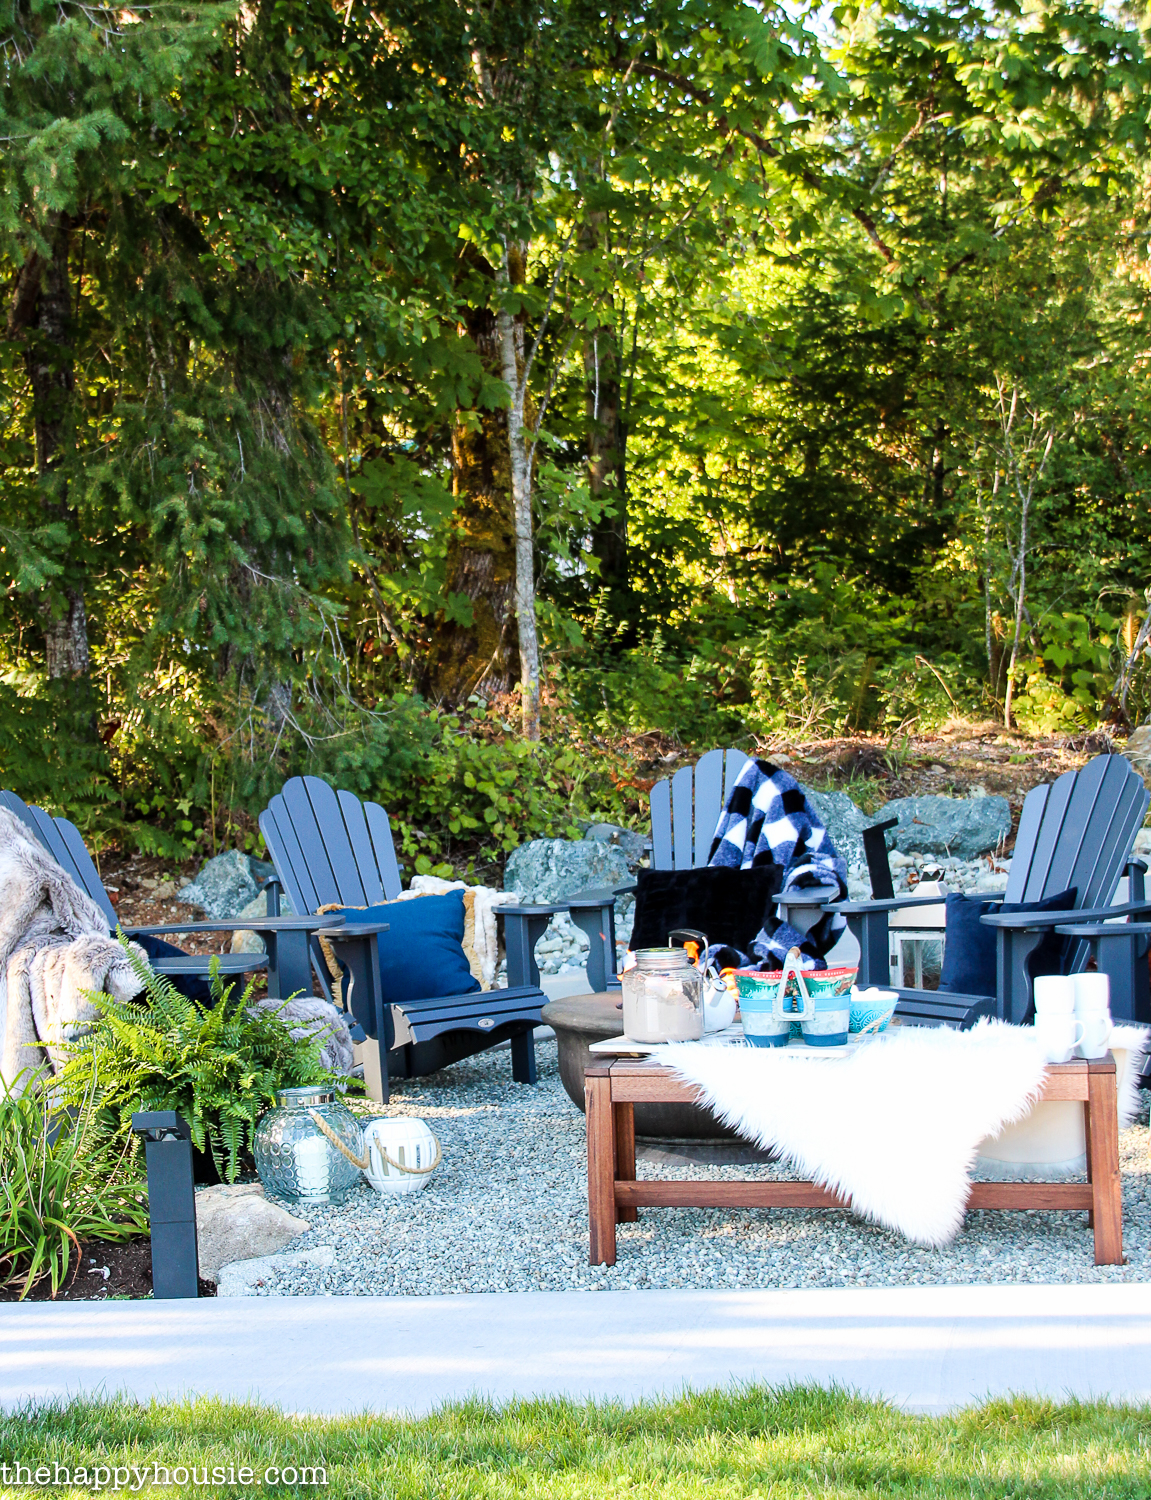 a pea gravel patio area with adirondack chairs backing against a forest